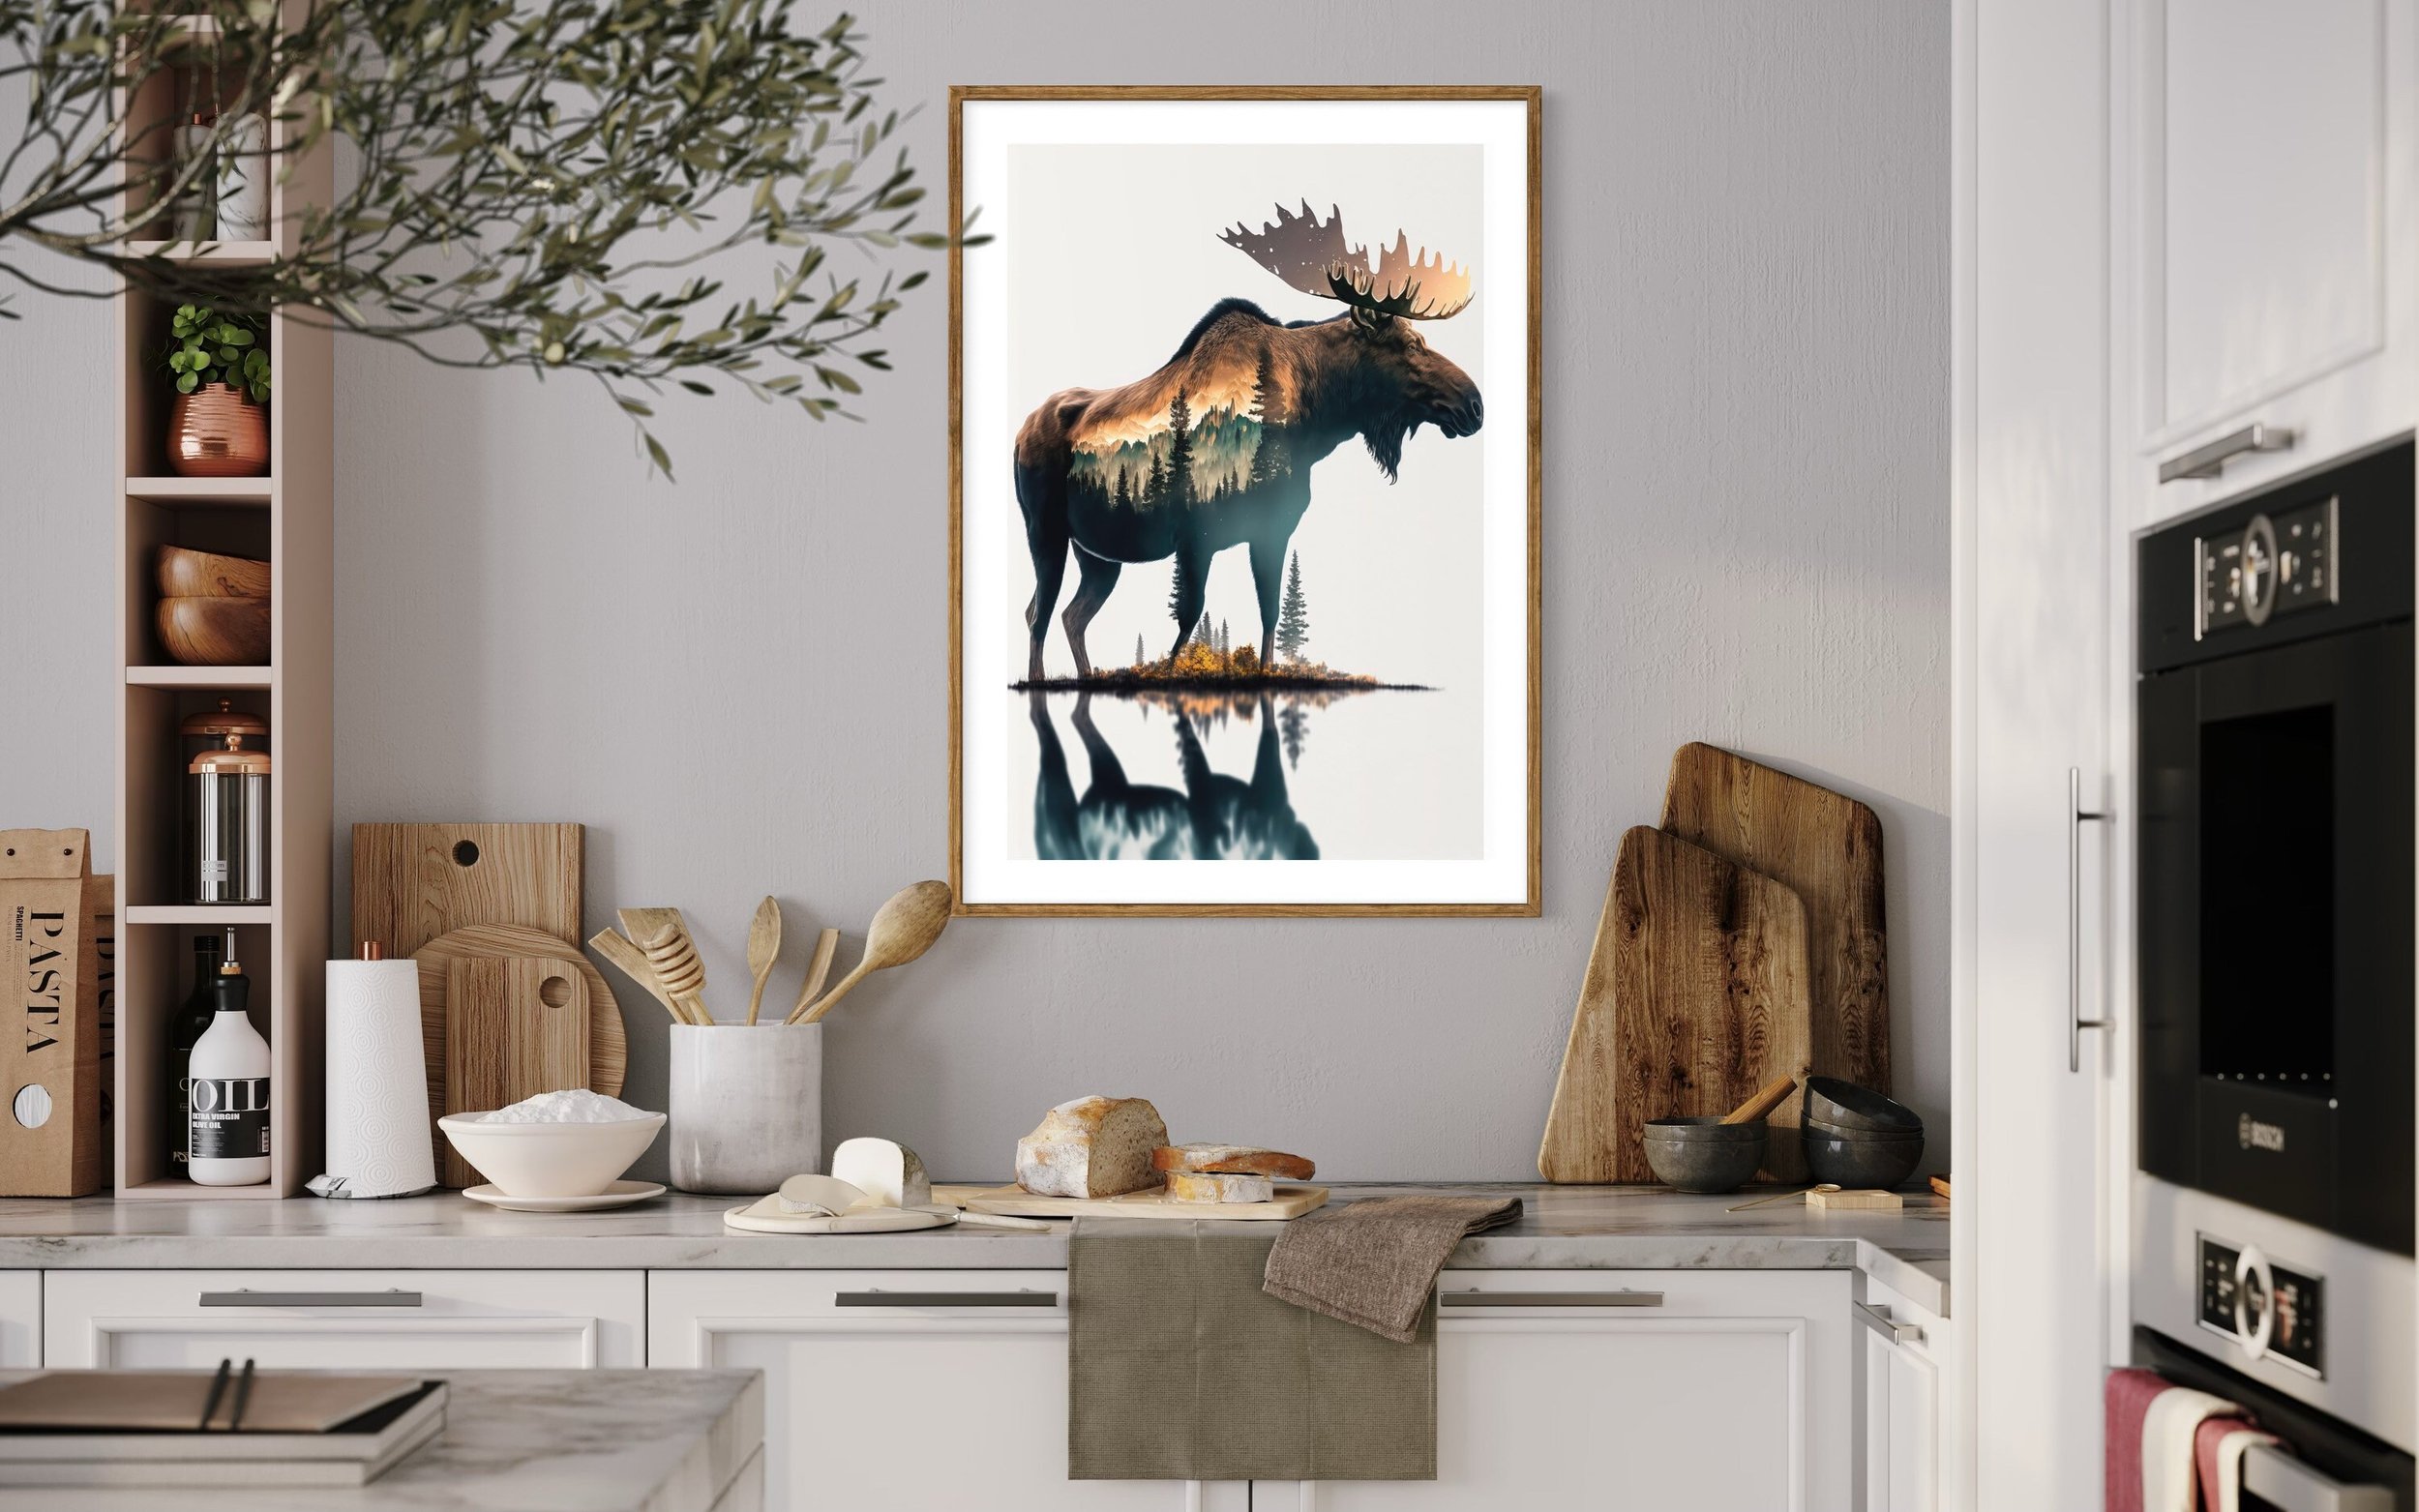 Wandering Moose | Double Exposure Art Nature Decor Modern Wall Canvas Prints Metal Painting Cabin